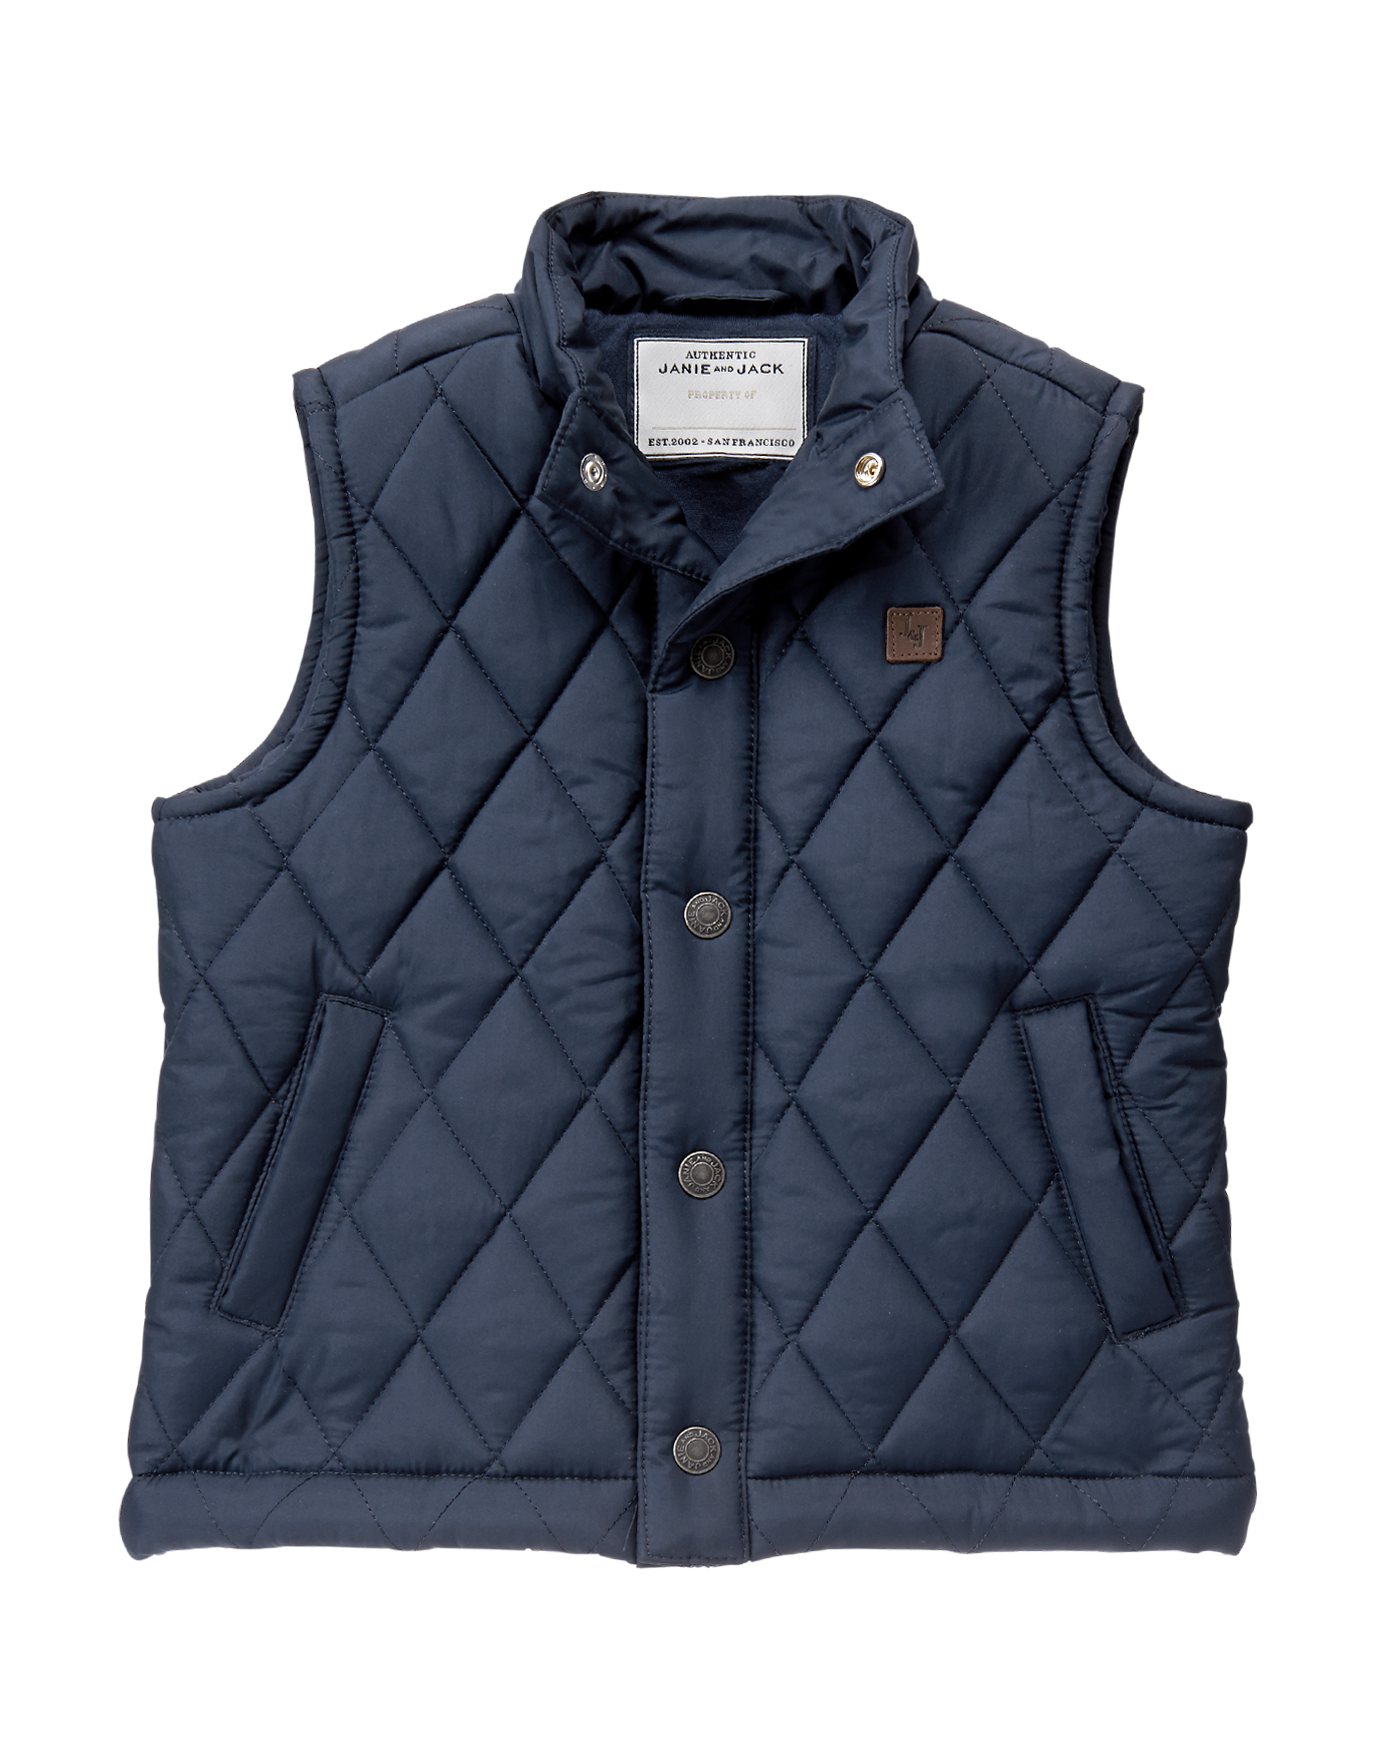 Eagle Eye Explorer Kids Cargo Vest for Boys and Girls with Reflective  Safety Straps. 100% cotton. Size: S/M Color: Navy Blue - Yahoo Shopping